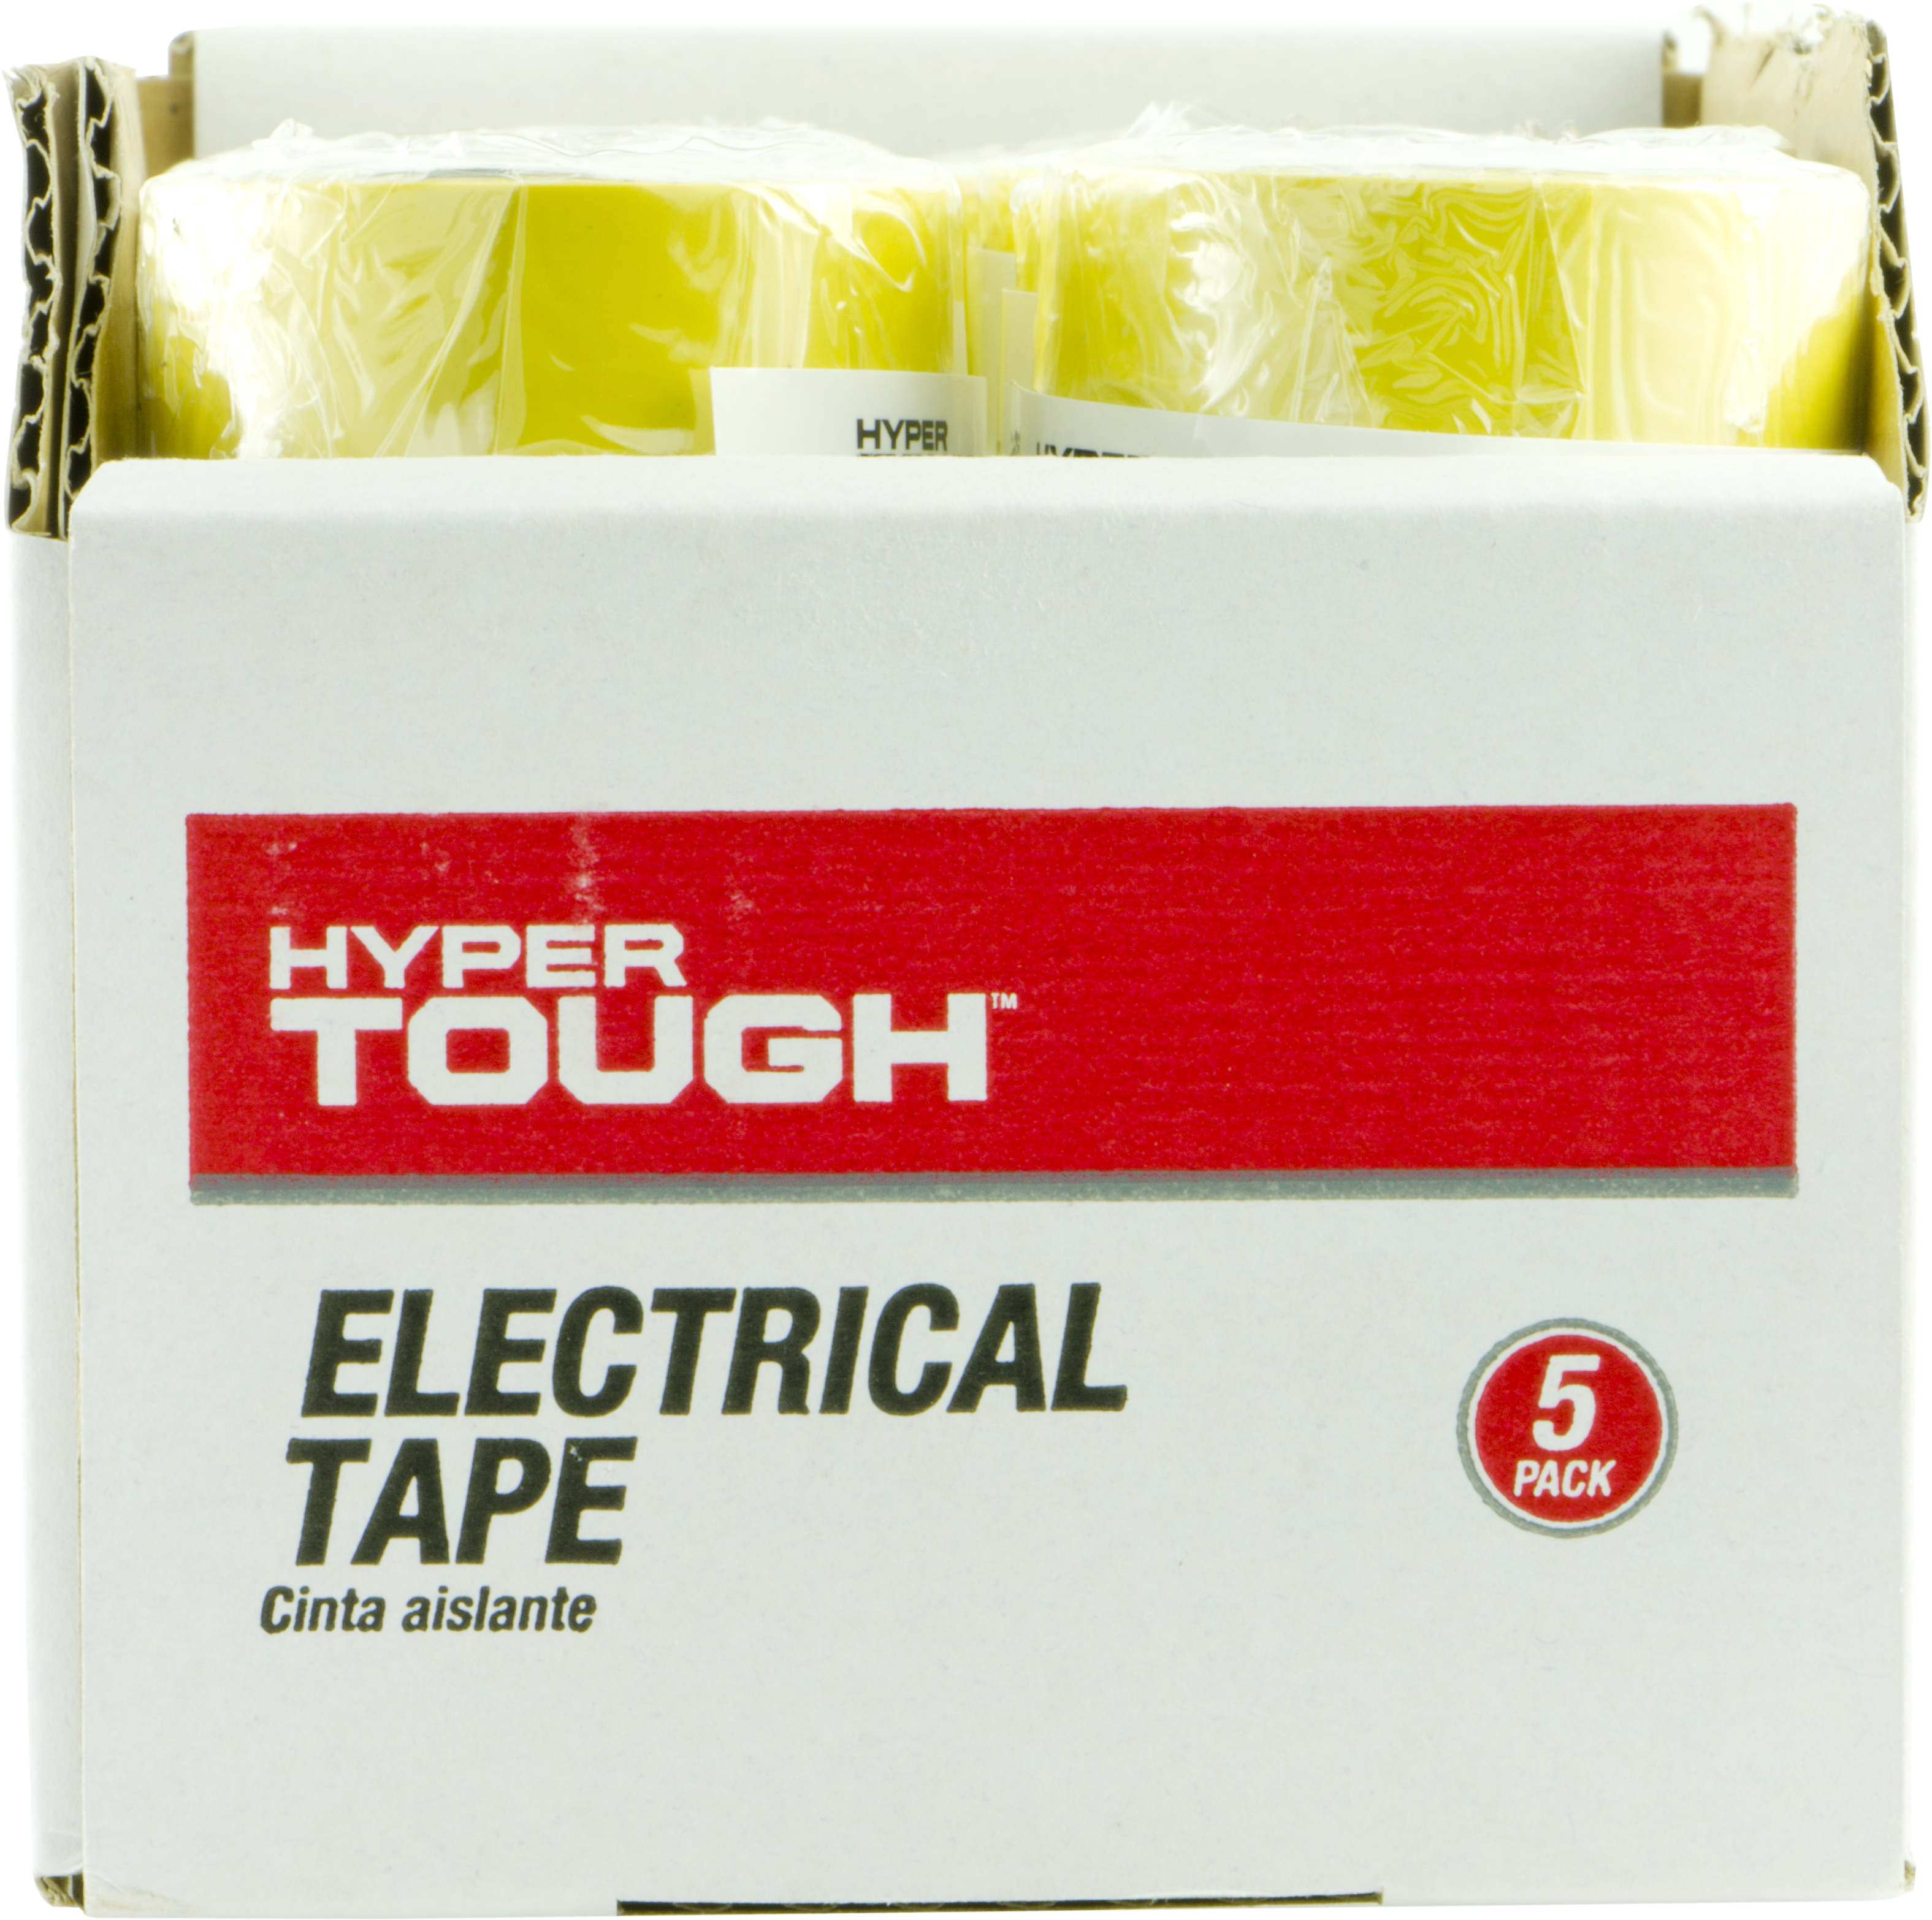 Hyper Tough Assorted Color Electrical Tape, 14ft length, Indoor, 5 Pack, 3/4in, 0.26lbs - 35831 - image 4 of 5